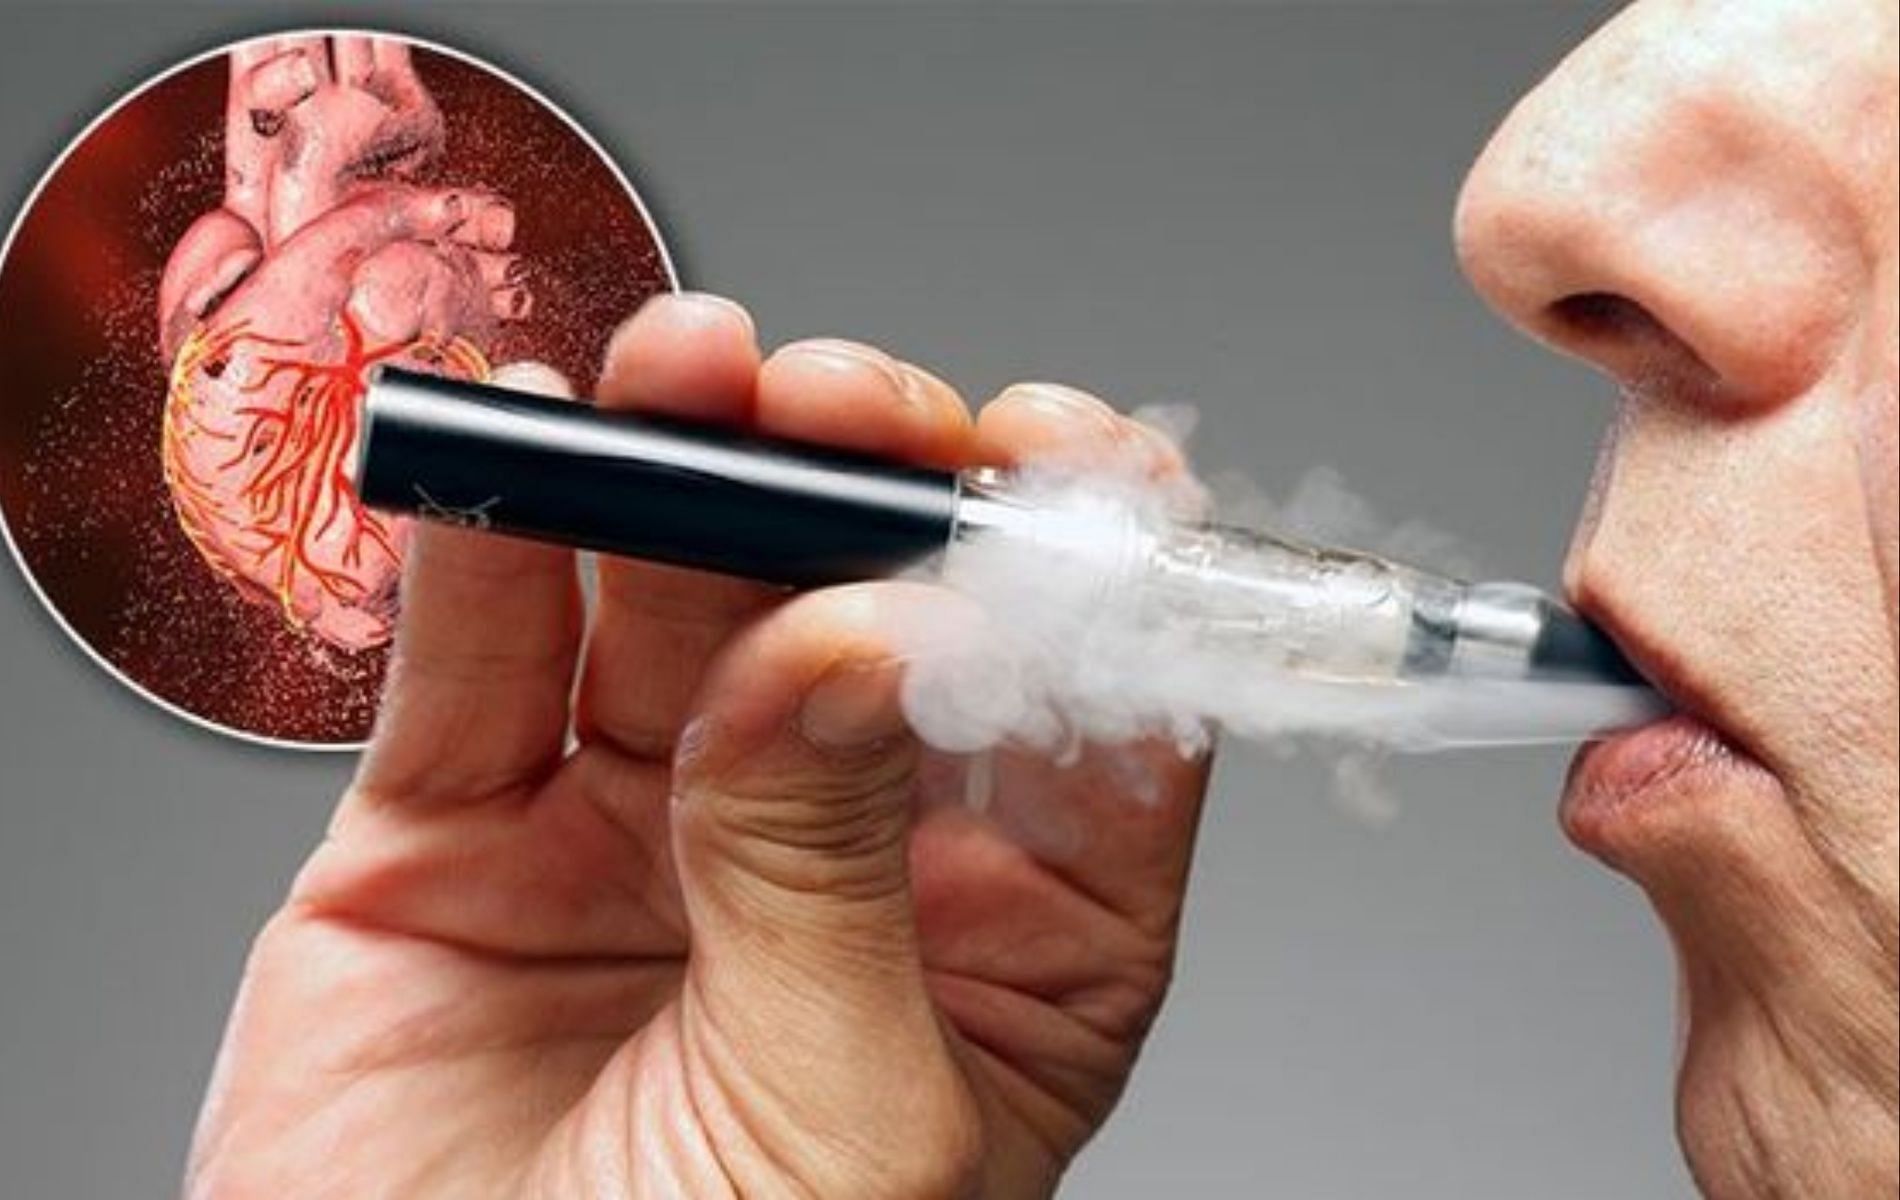 New studies suggest that vaping causes heart diseases. (Image via Daily Express)